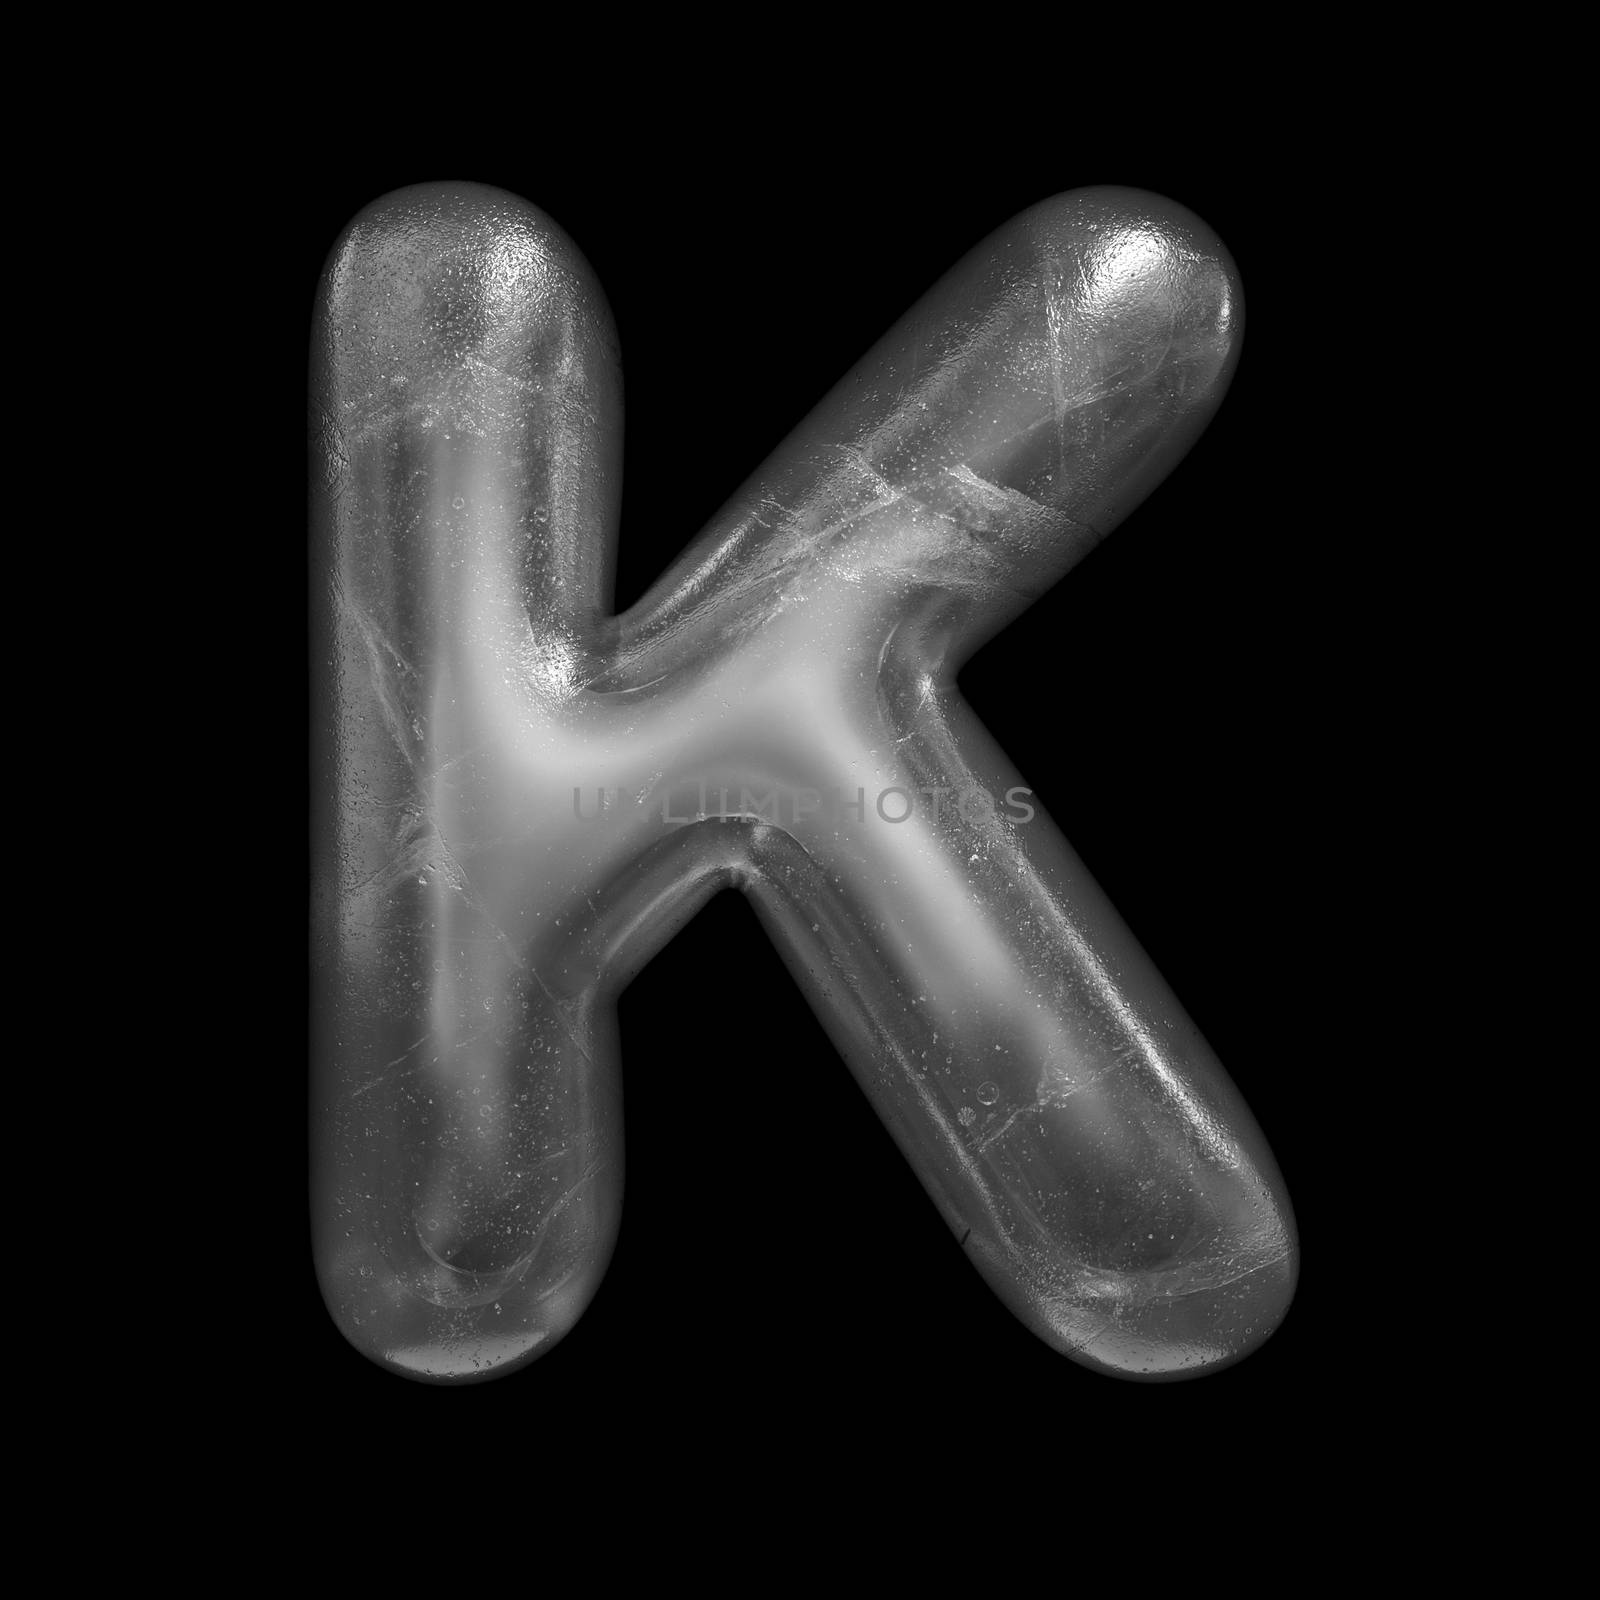 Ice letter K - Large 3d Winter font isolated on black background. This alphabet is perfect for creative illustrations related but not limited to Nature, Winter, Christmas...